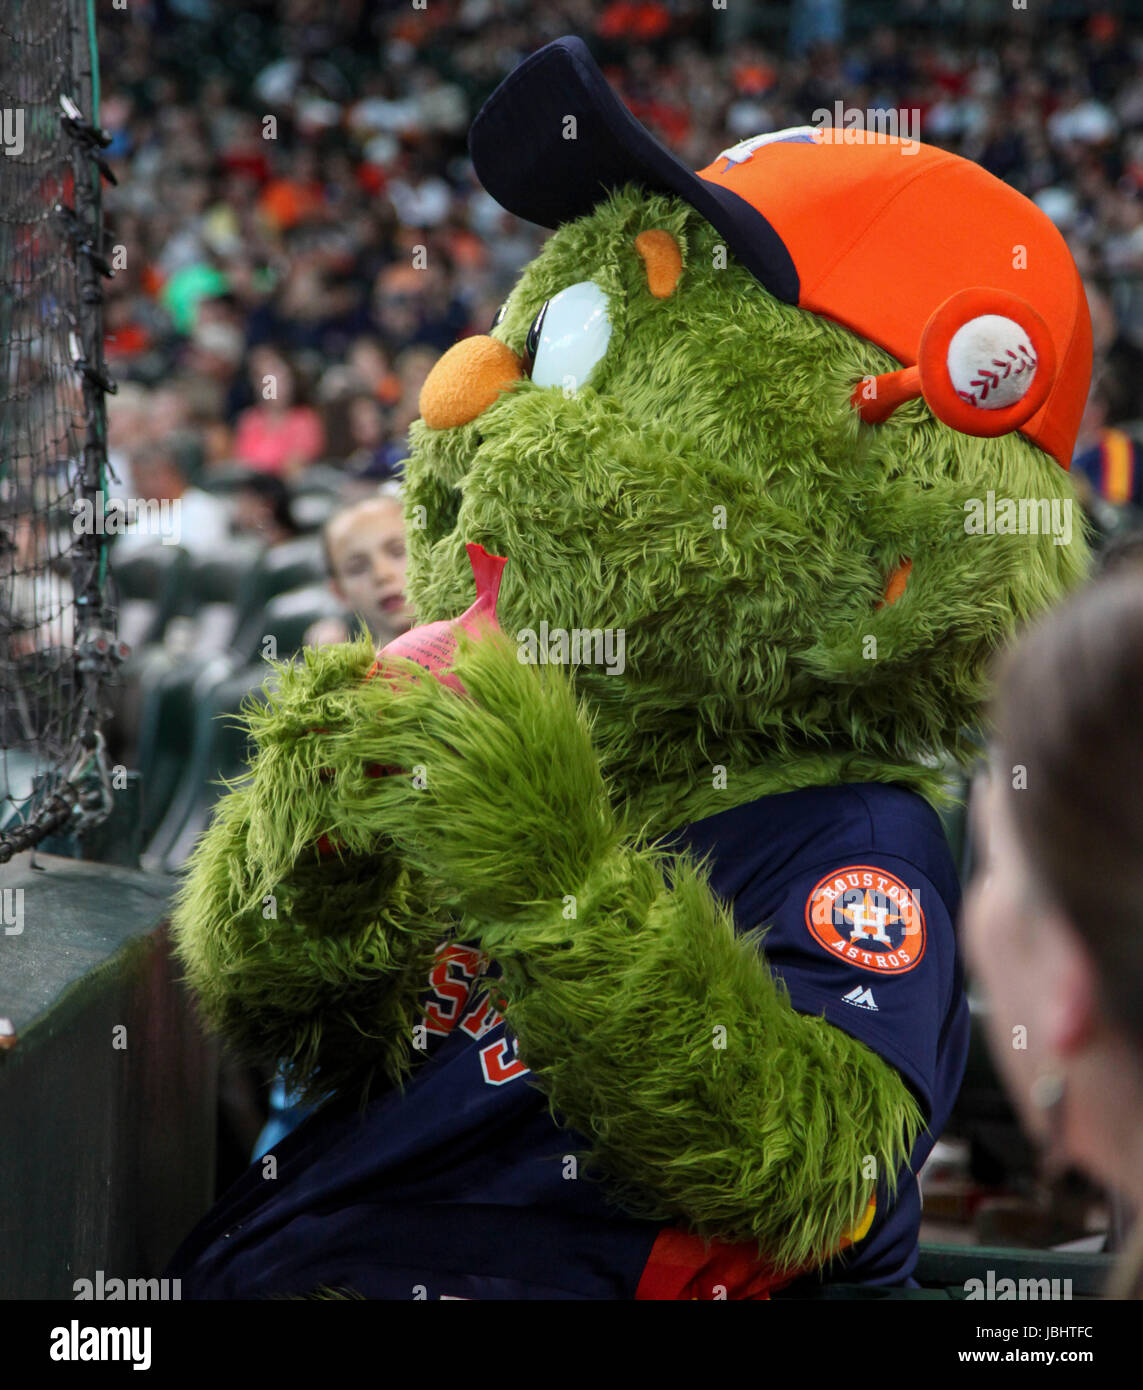 Houston, TX, USA. 11th June, 2017. The Houston Astros mascot Orbit uses a whoopee cushion as a prank during the MLB game between the Los Angeles Angels and the Houston Astros at Minute Maid Park in Houston, TX. John Glaser/CSM/Alamy Live News Stock Photo